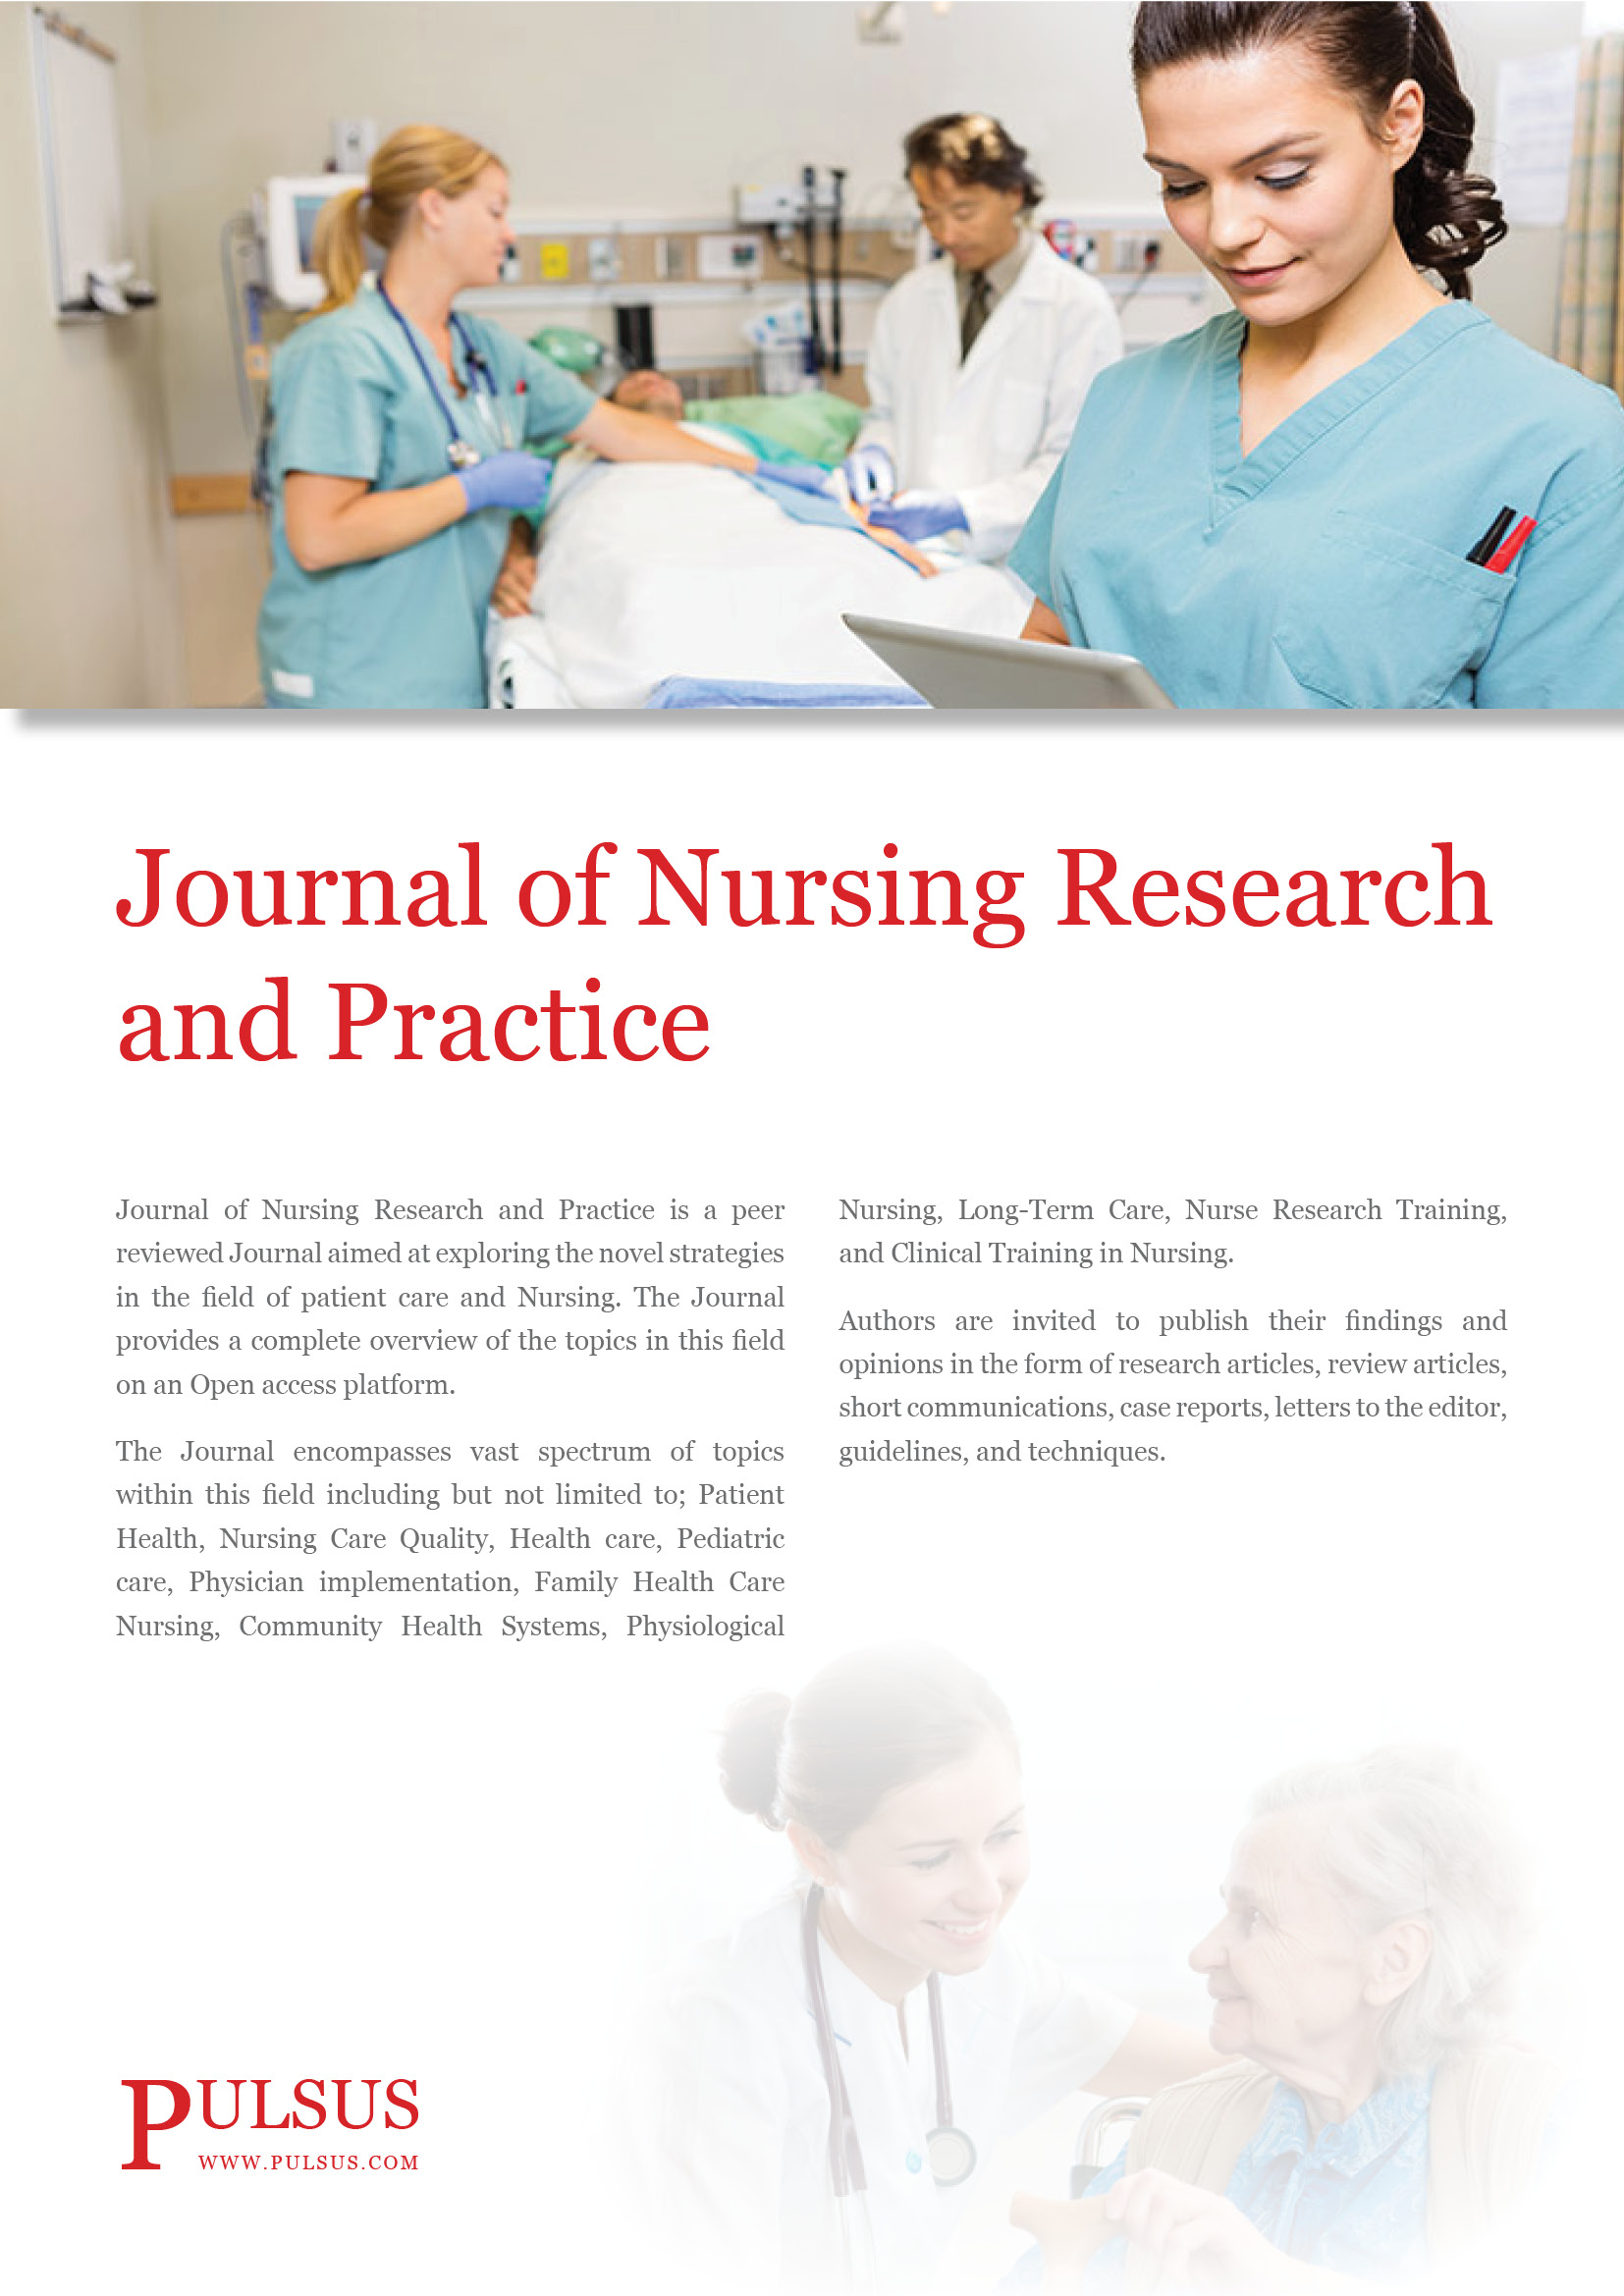 Journal of Nursing Research and Practice